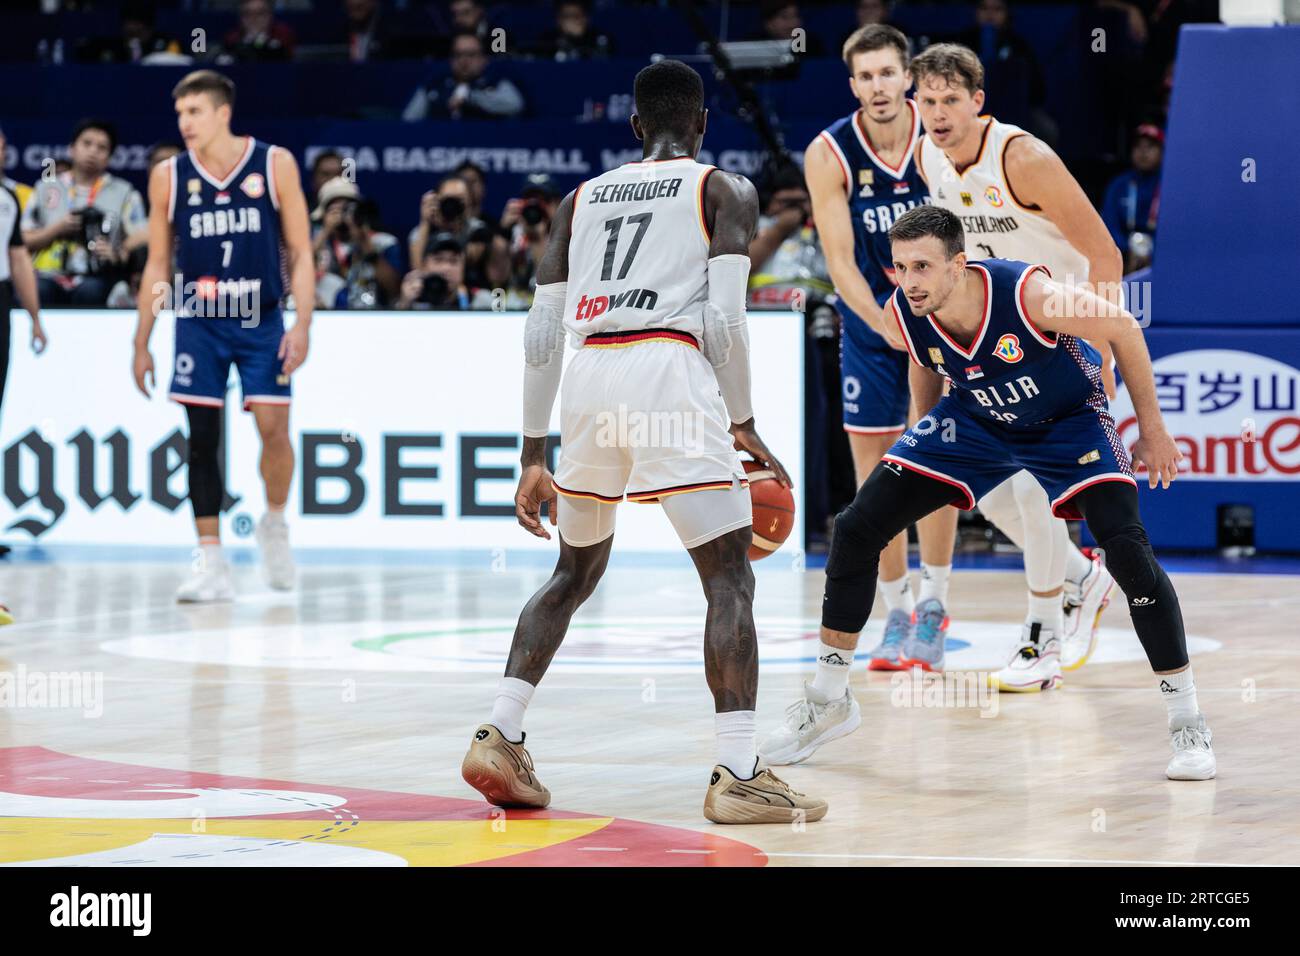 Dennis Schroder of Germany seen in action during the finals of the FIBA Basketball World Cup 2023 between Serbia and Germany at the Mall of Asia Arena-Manila. Final score: Germany 83:77 Serbia. Stock Photo